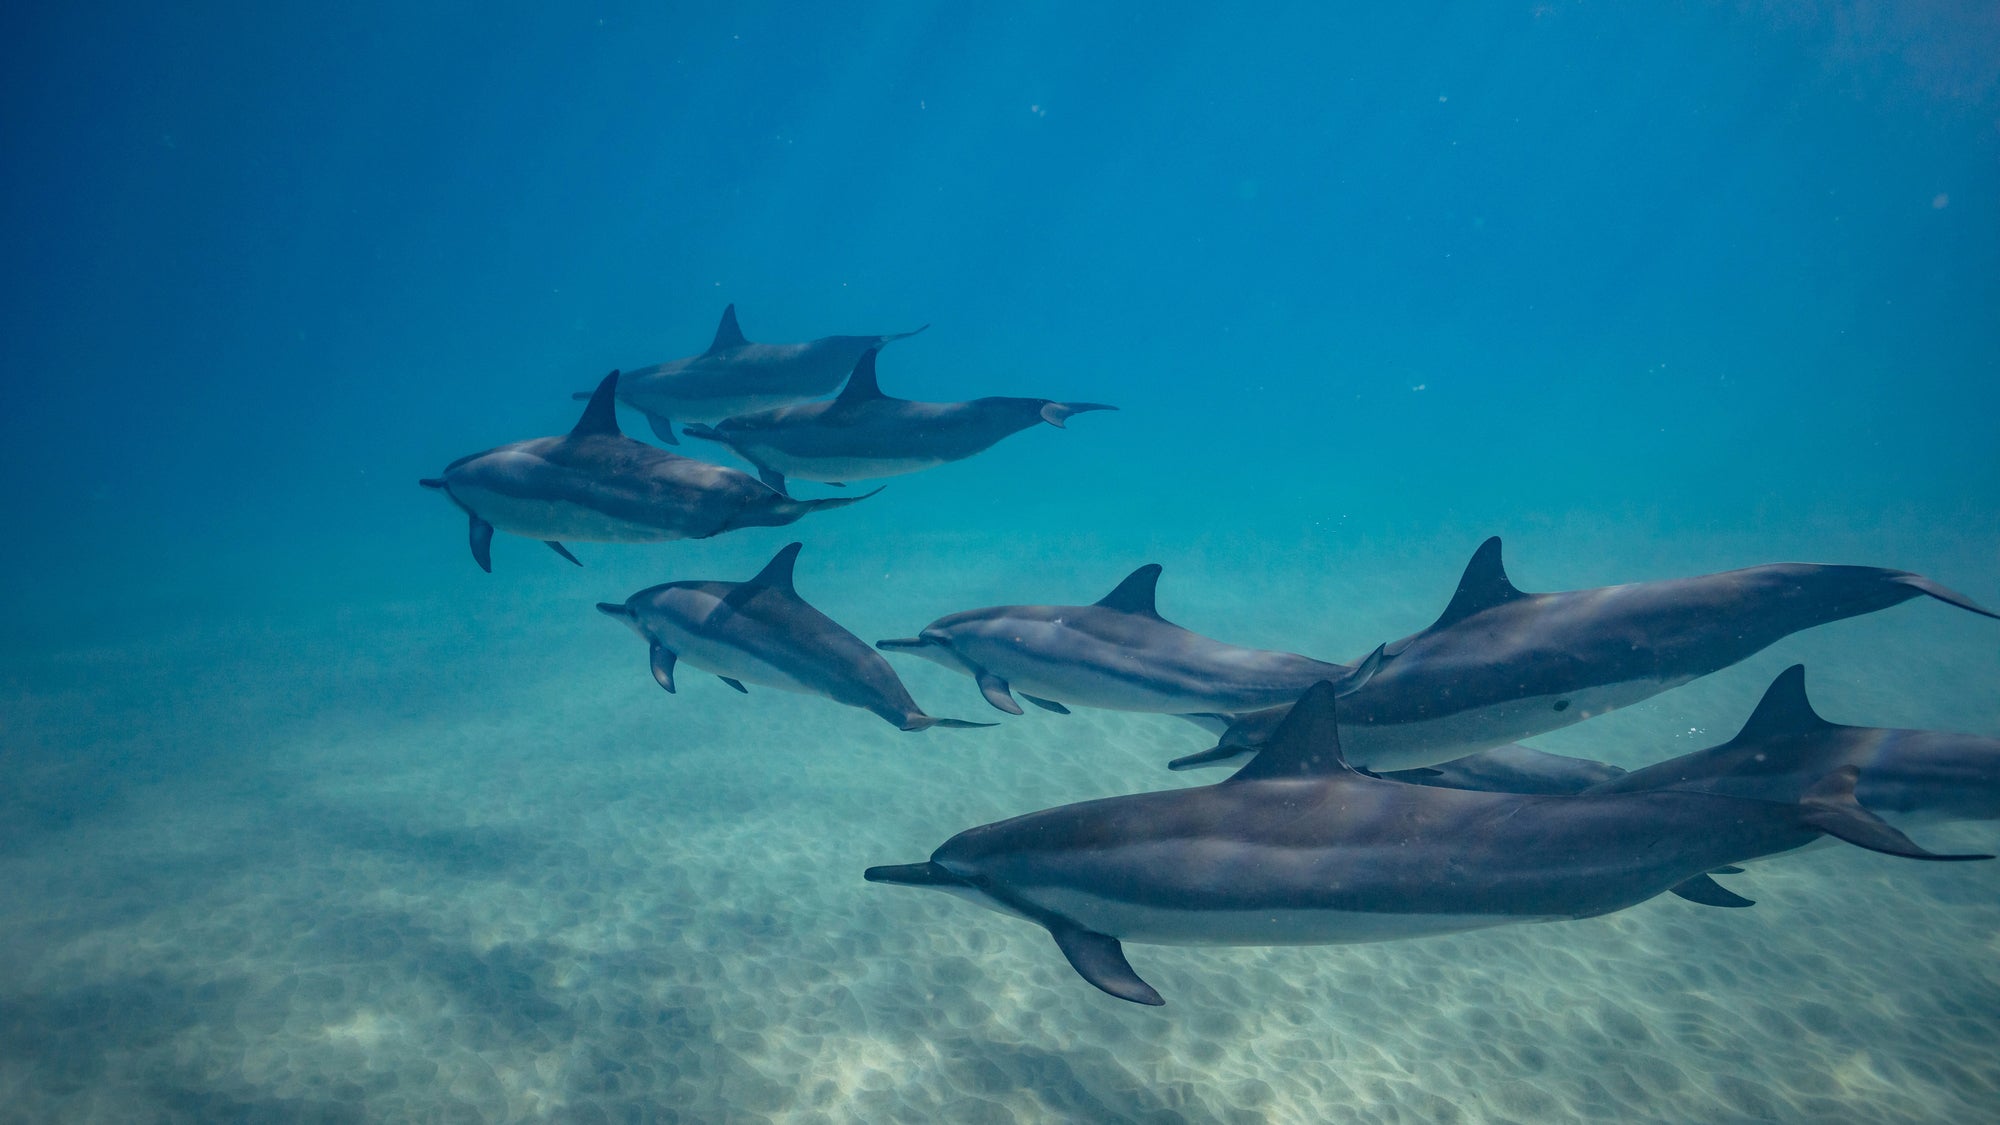 To find out the age of dolphins, ask about their poop